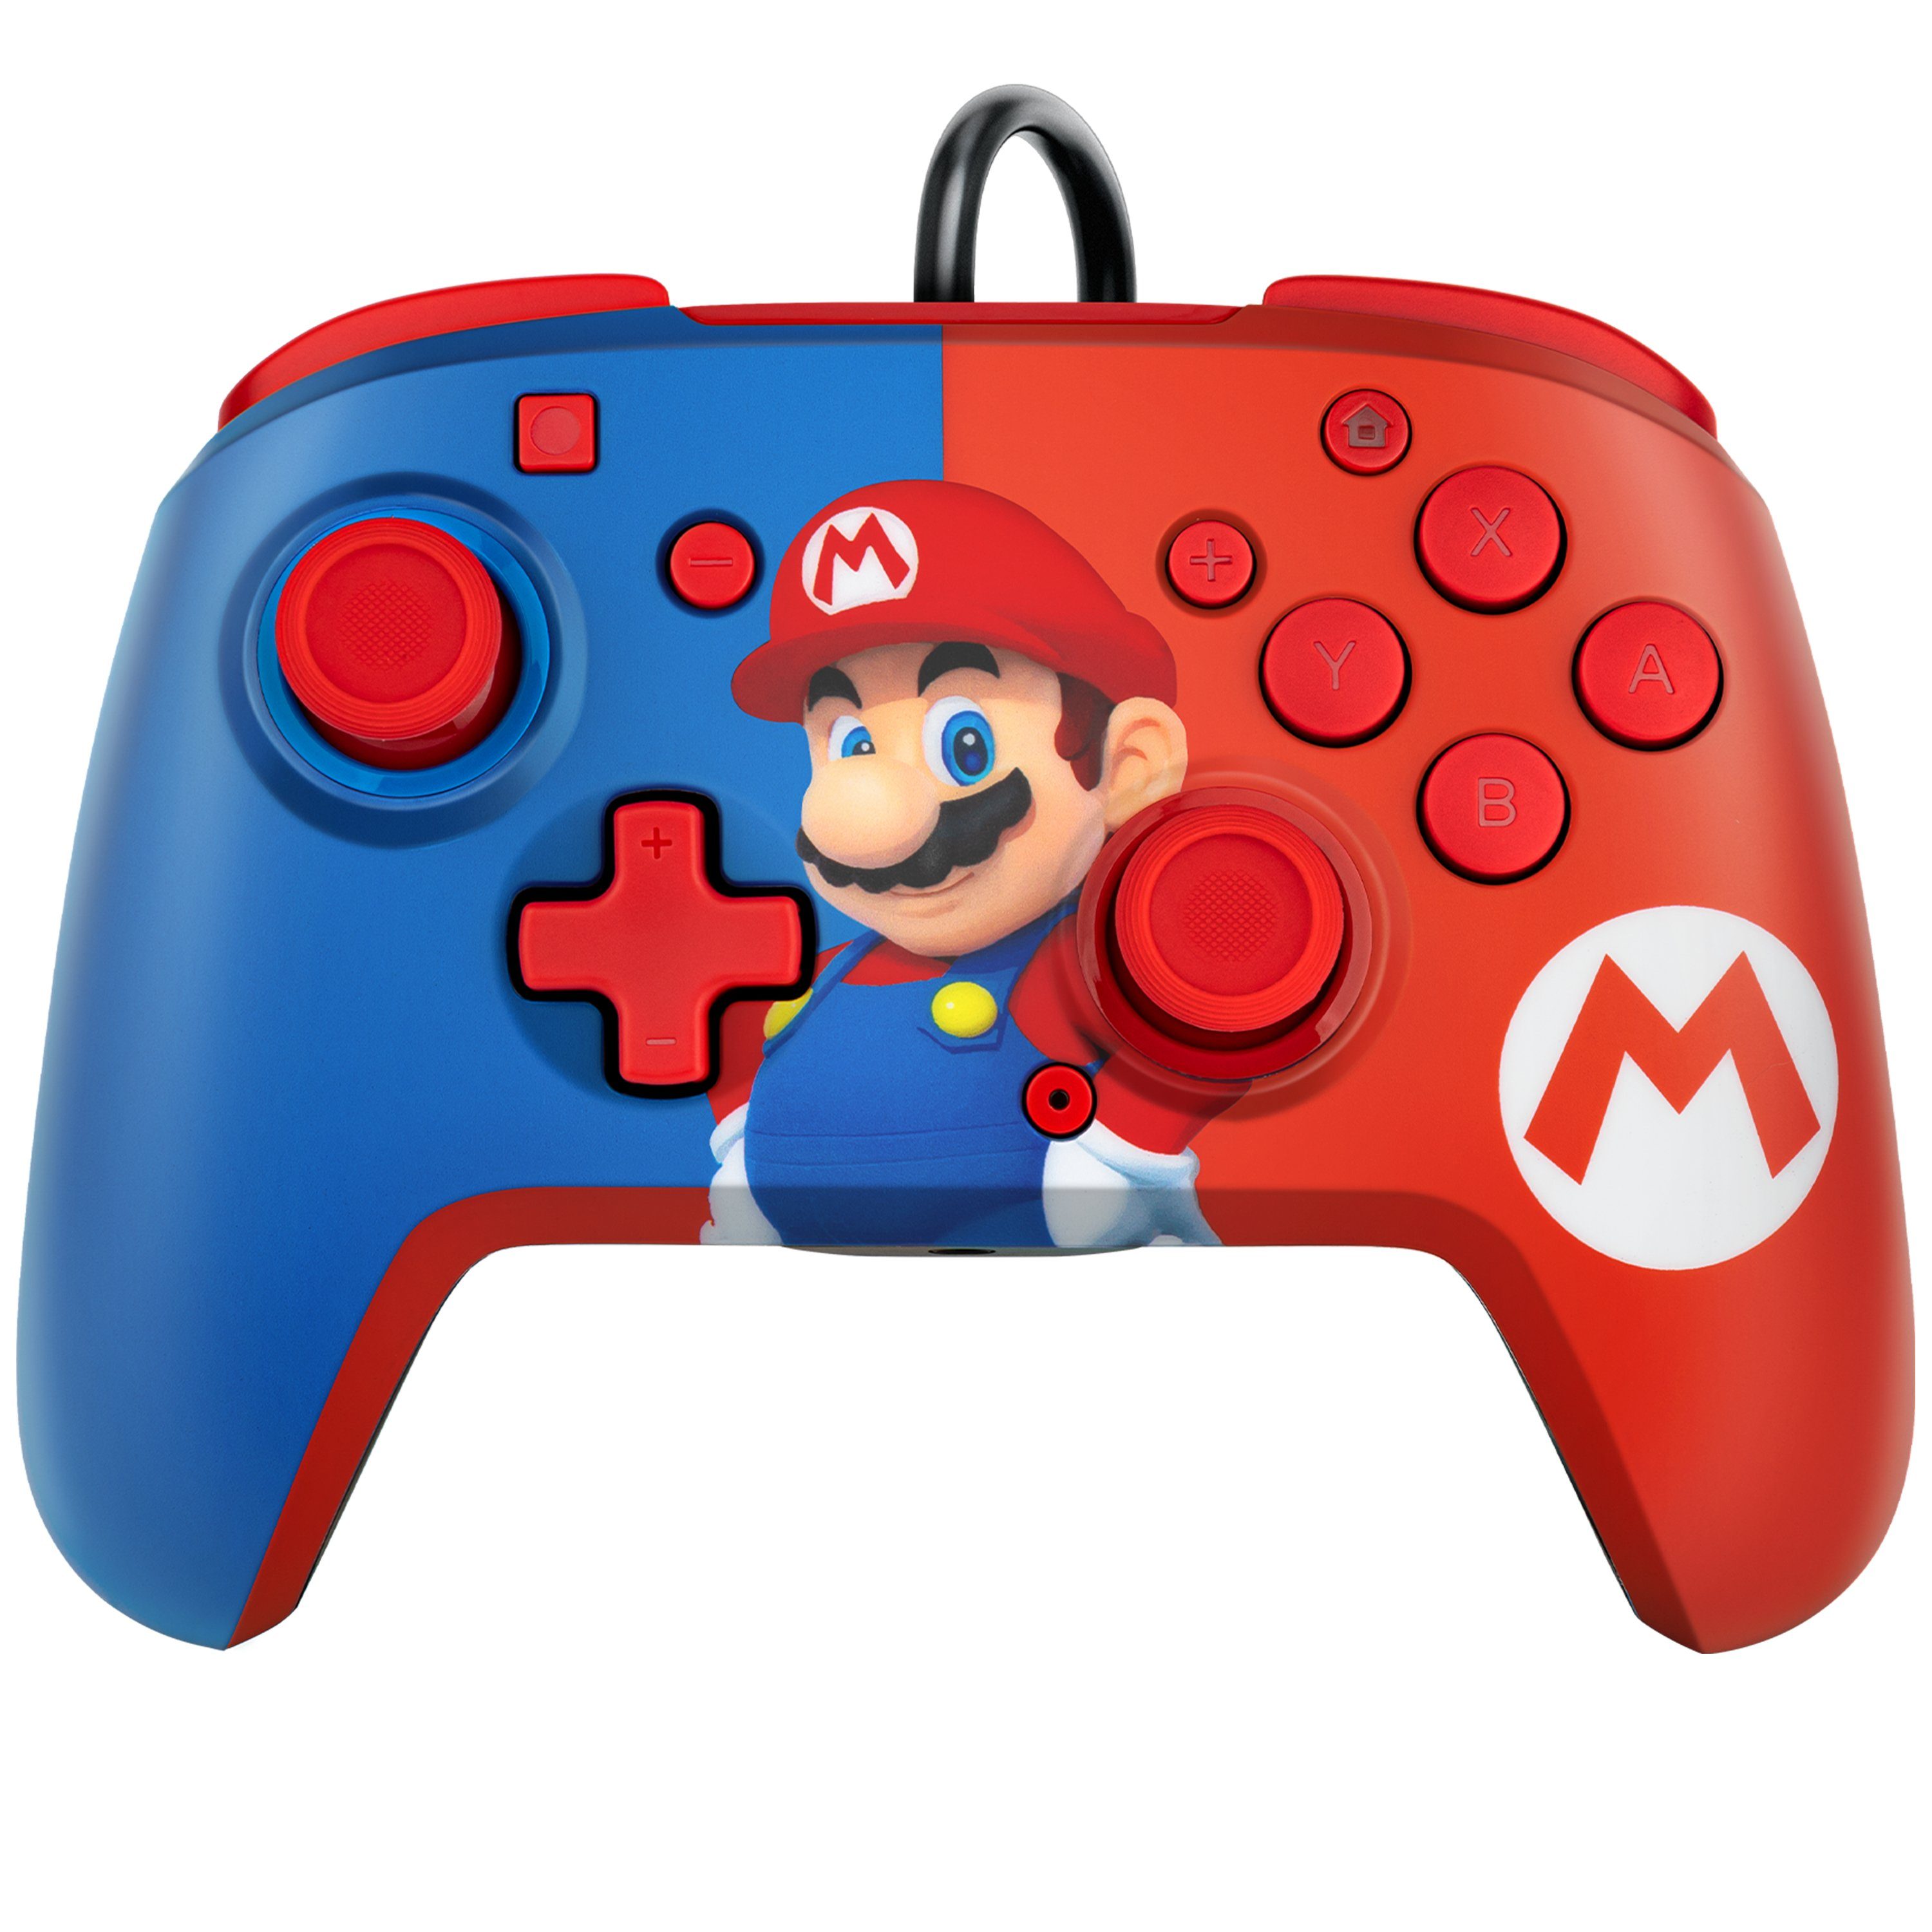 PDP - Performance Designed Products Mario REMATCH Gamepad